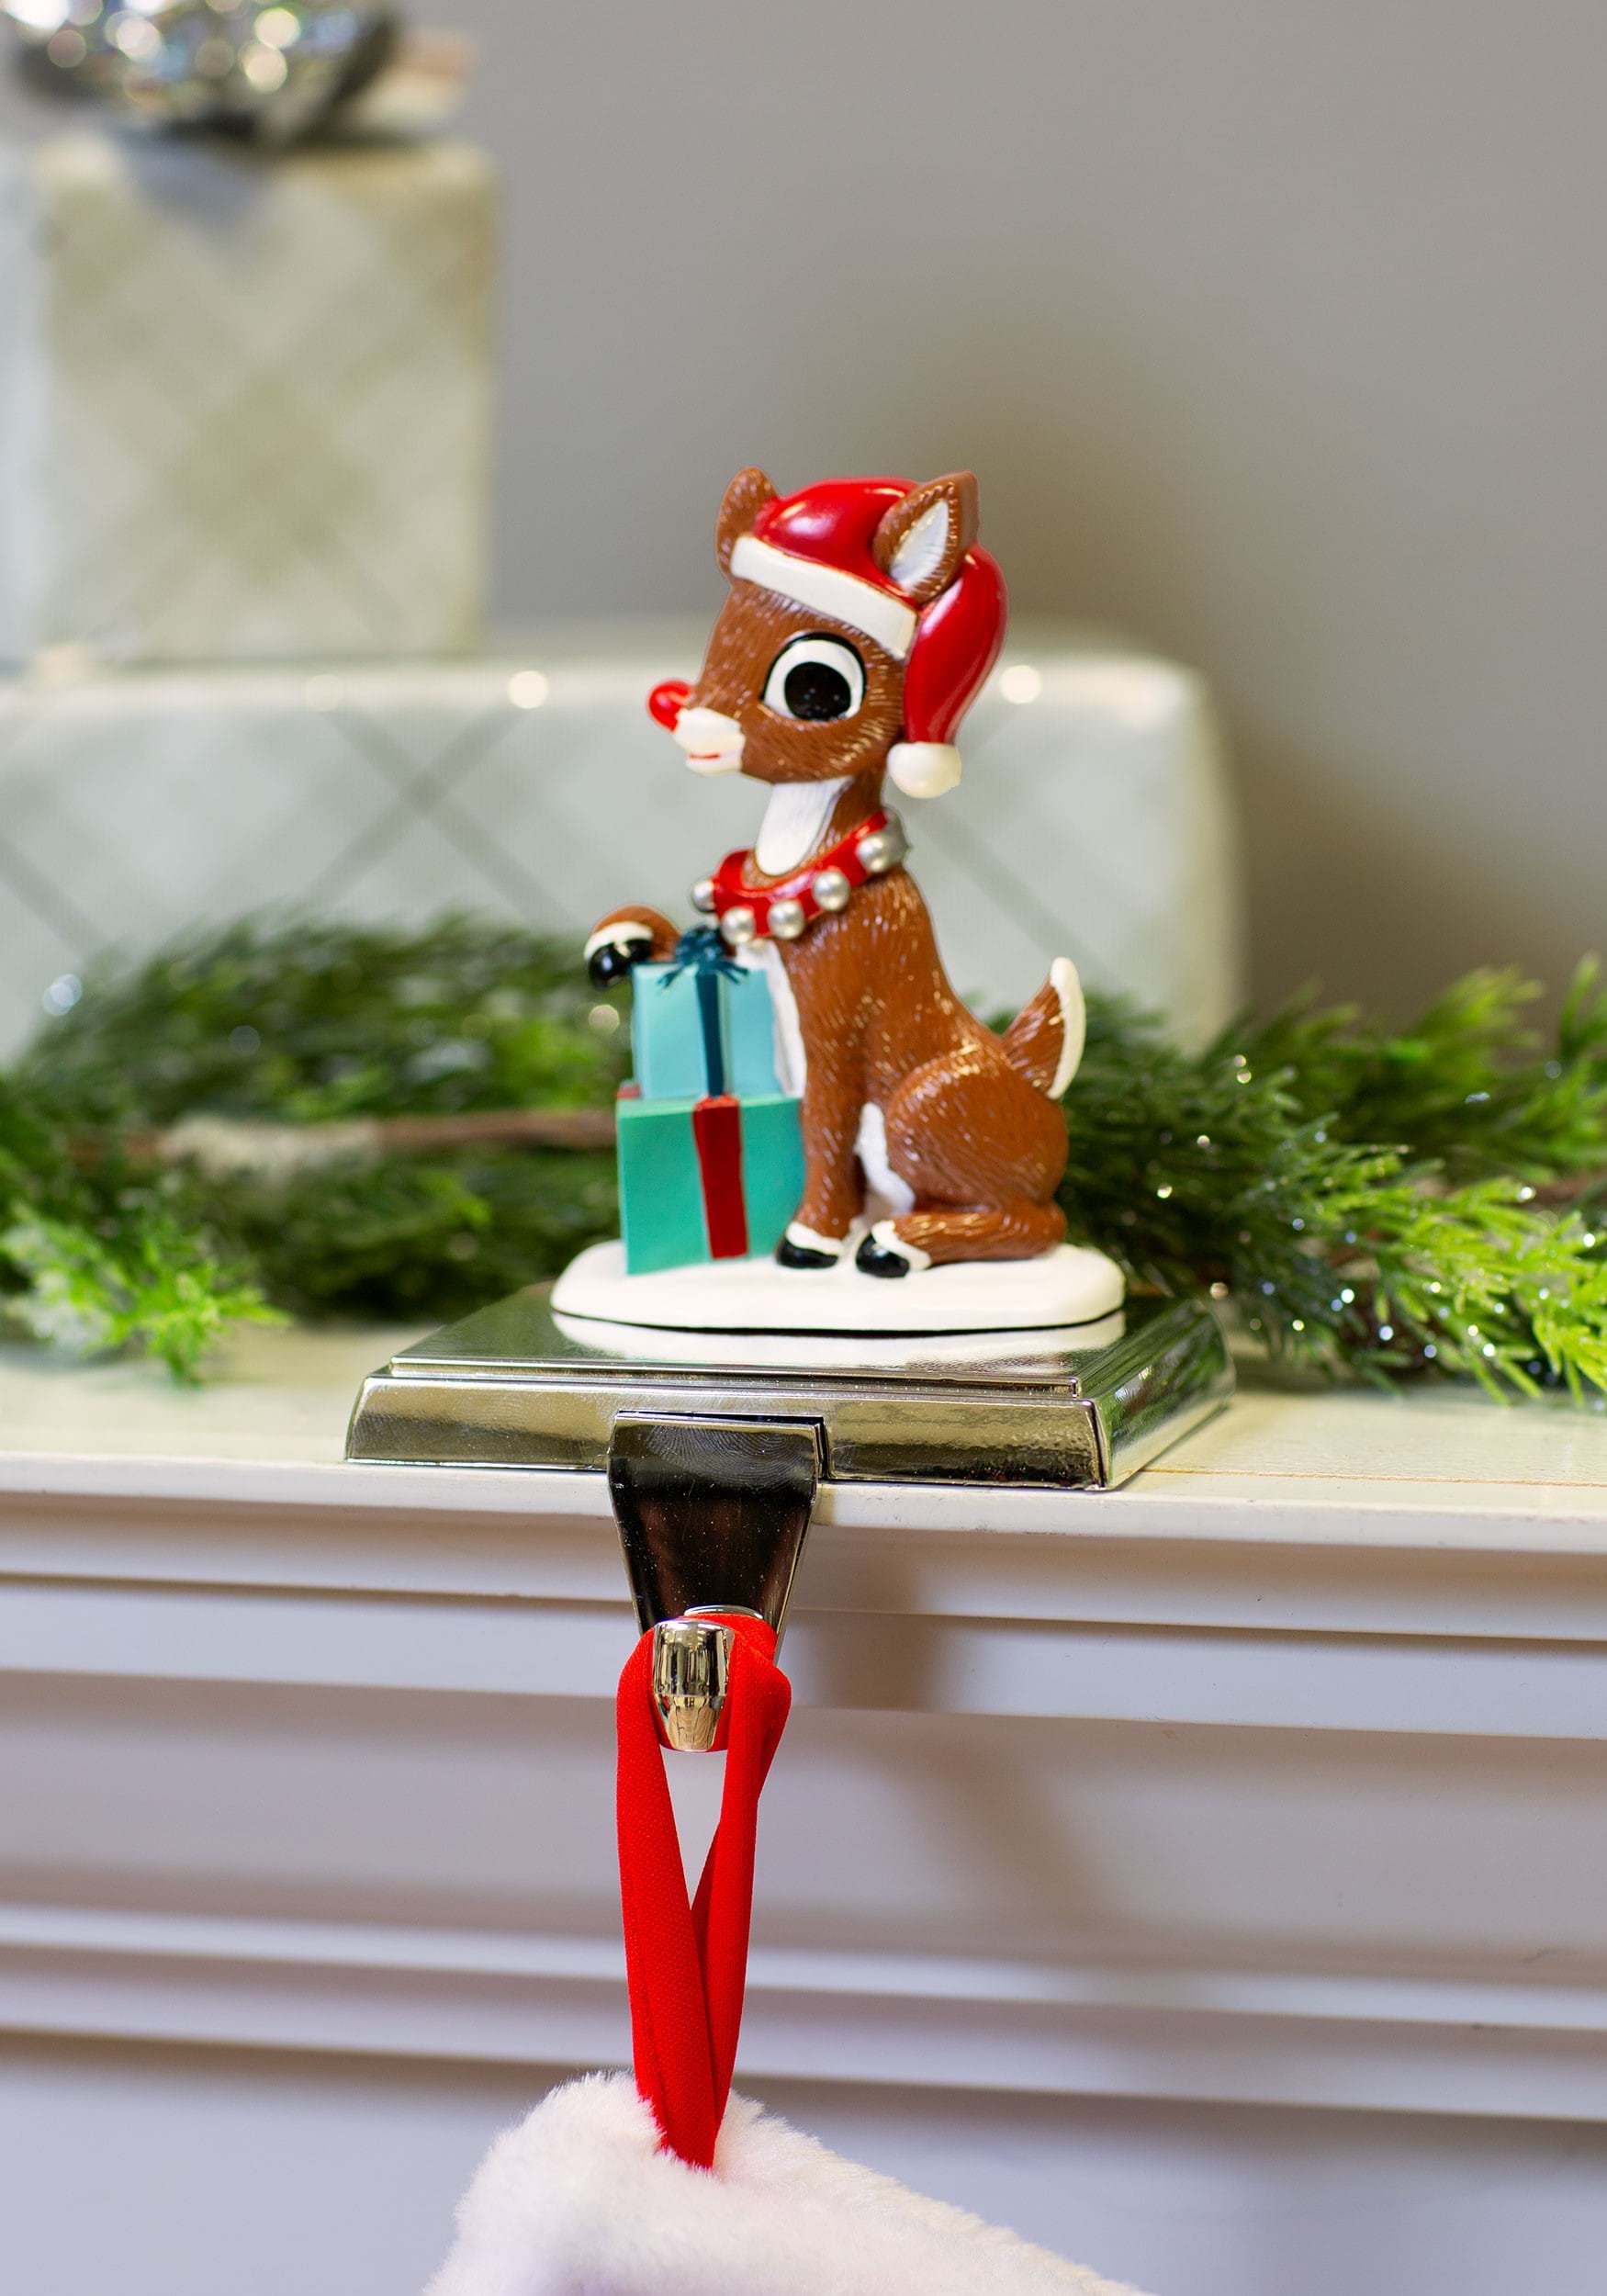 6.5" Rudolph with Presents Stocking Holder Decoration